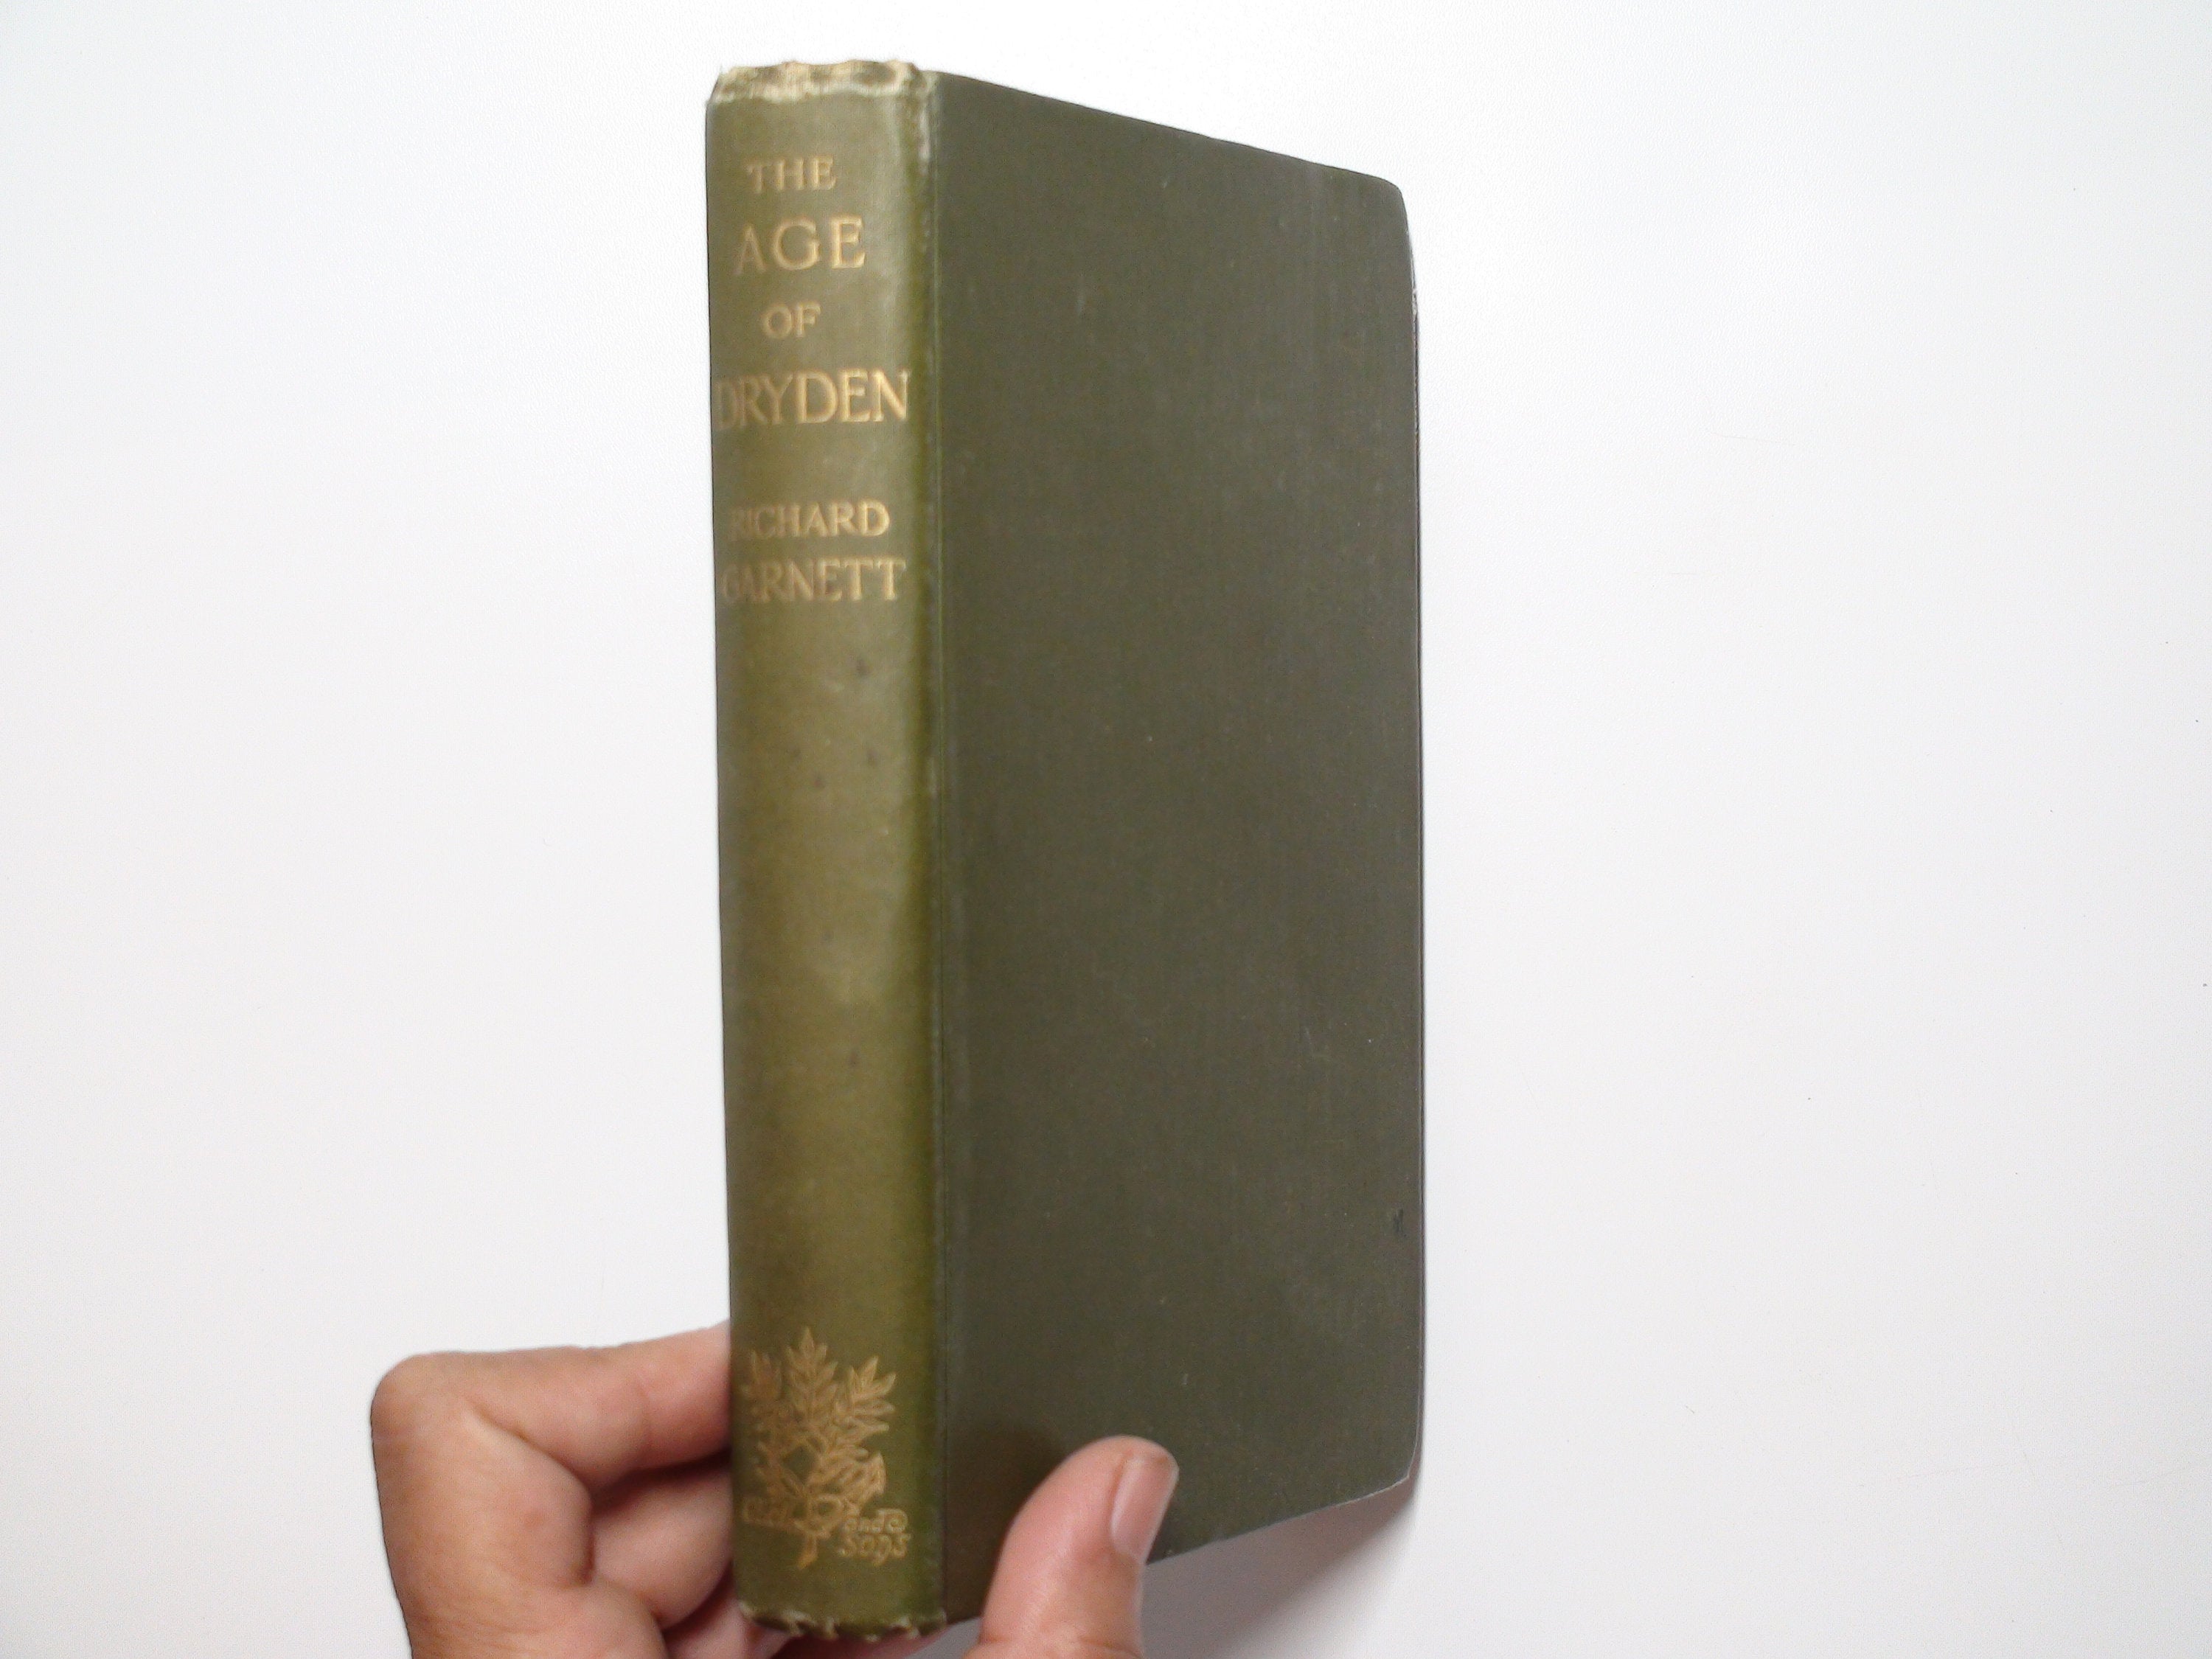 The Age of Dryden by R. Garnett, George Bell and Sons, Rare, 1st Ed, 1895